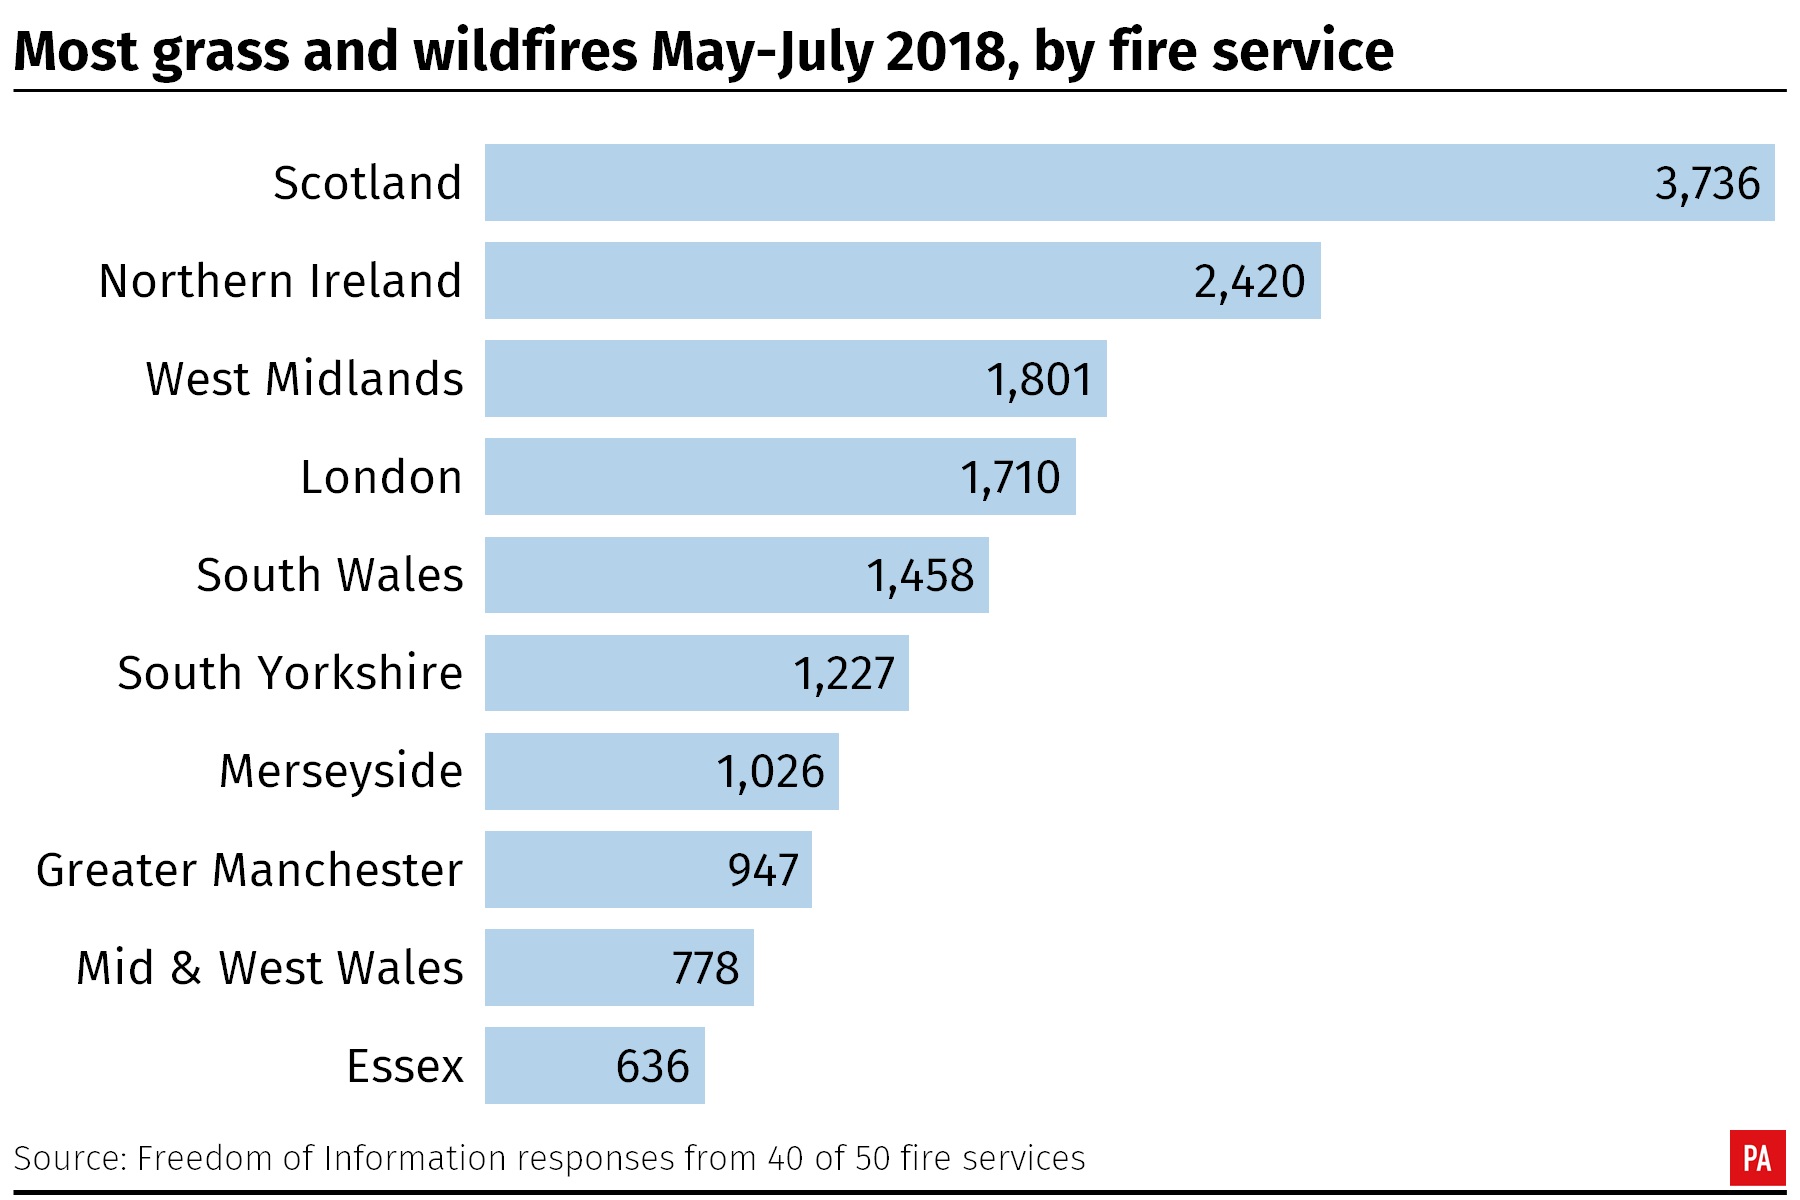 A graph shows the total number of grass and wildfires in summer 2018 in Scotland, Northern Ireland, West Midlands, London, South Wales, South Yorkshire, Merseyside, Greater Manchester, Mid and West Wales and Essex